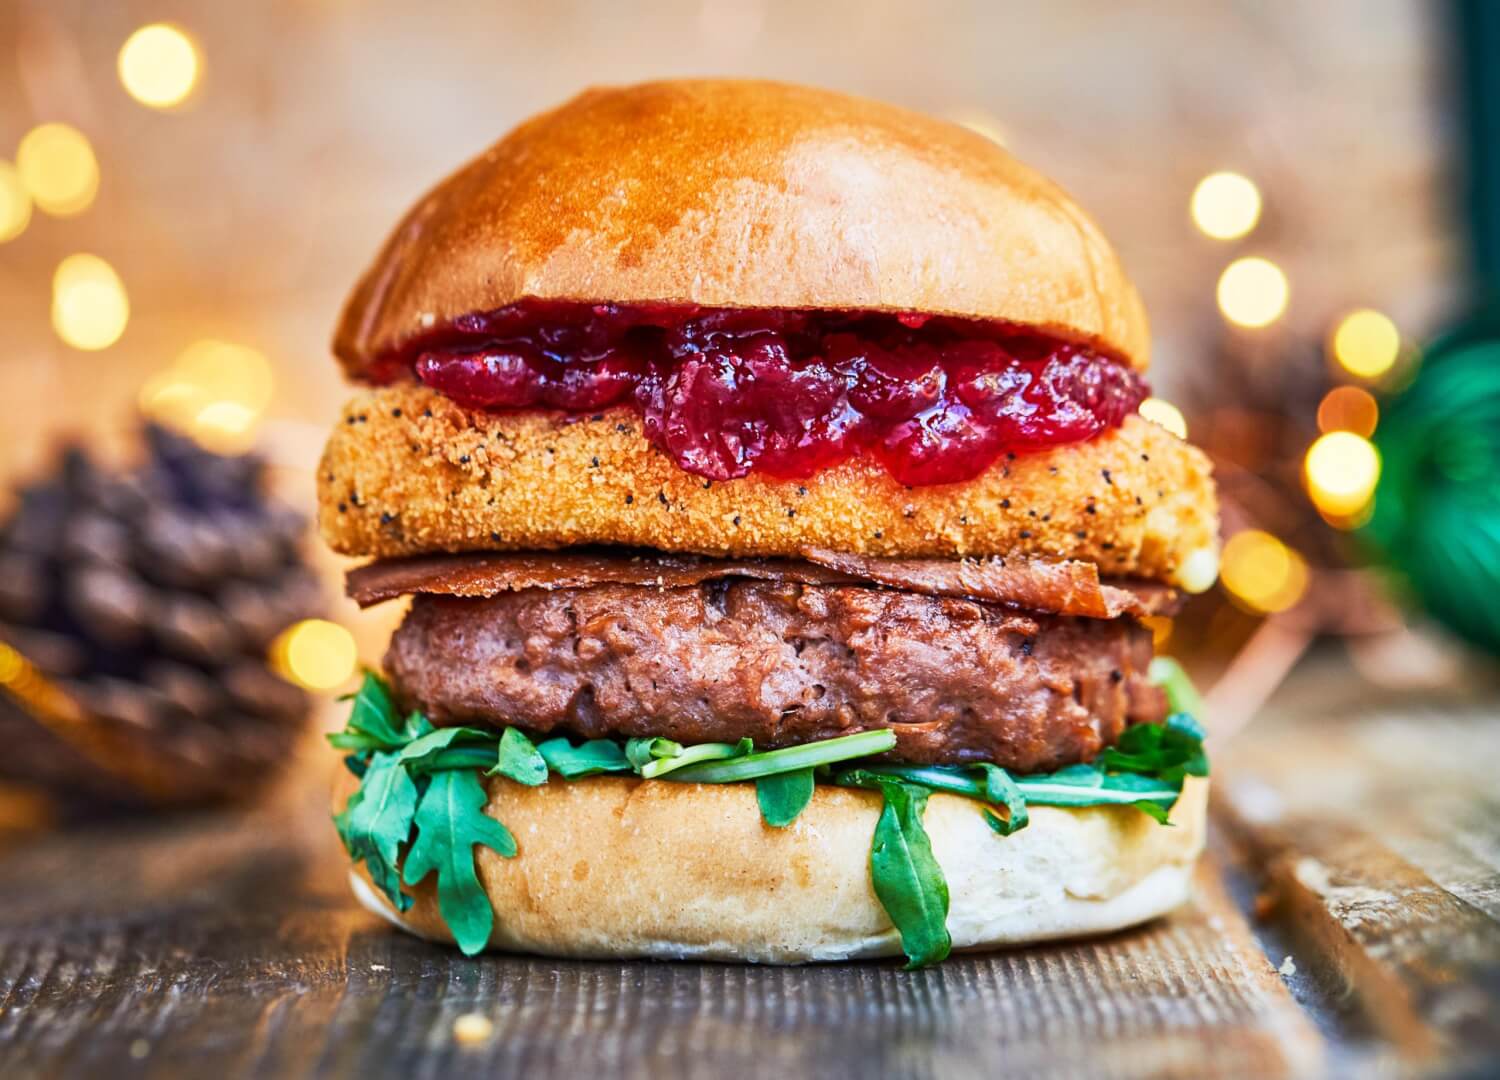 Christmas veggie beyond meat burger with deep fried camembert cheese and bacon